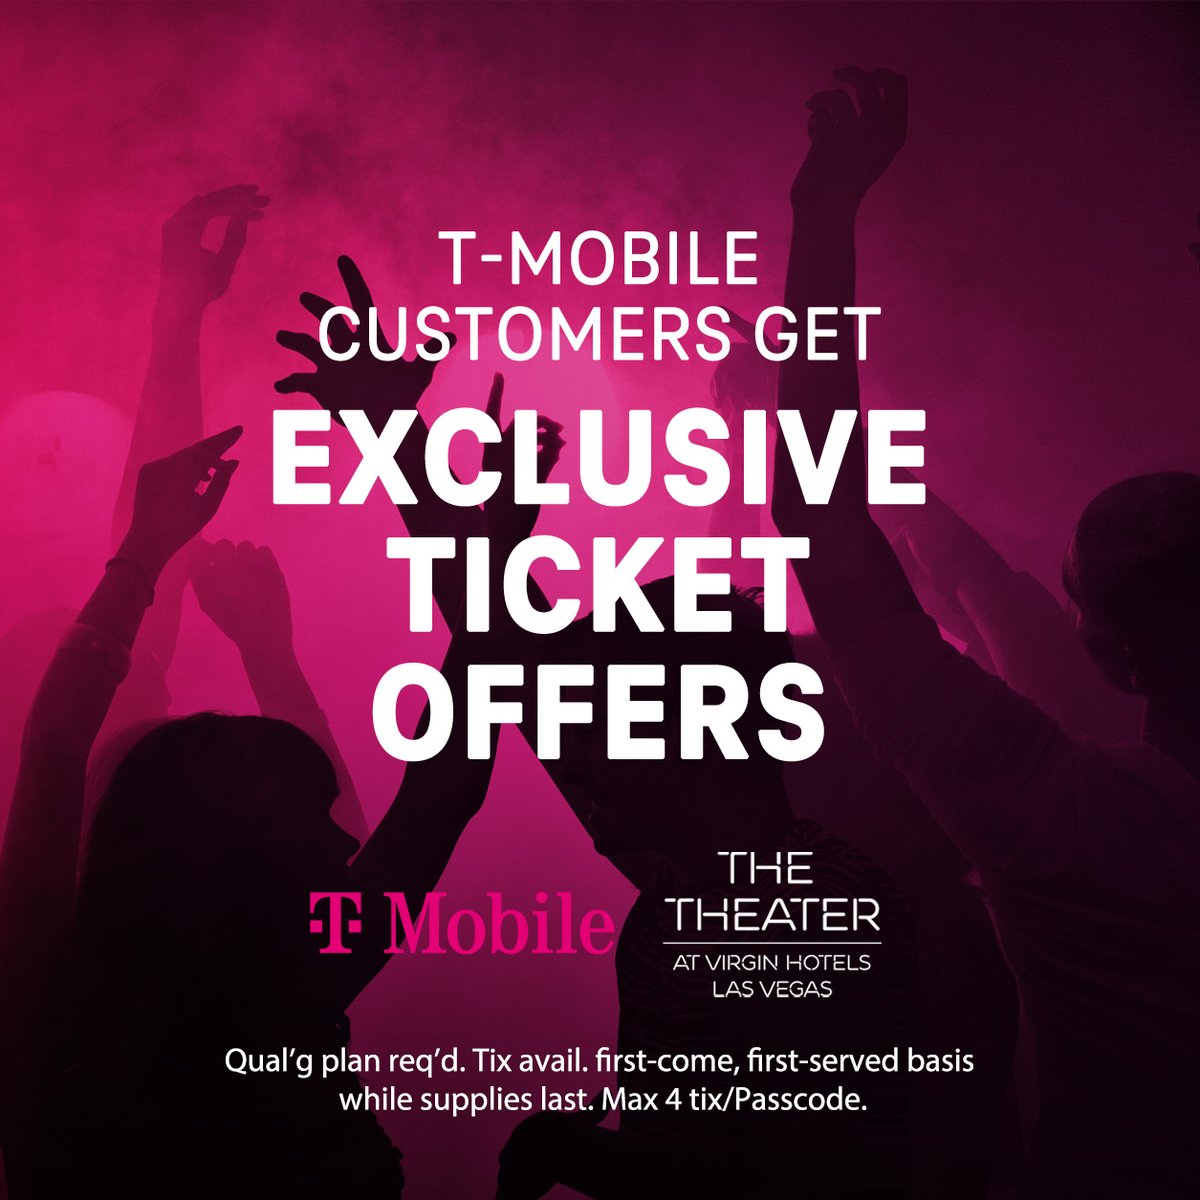 t’s @tmobile Tuesday and here’s your reminder that T-mobile customers receive the benefits of exclusive ticket offers at The Theater at Virgin Hotels Las Vegas! Find out more here: t-mobile-concert-perks.com/venue/128070?